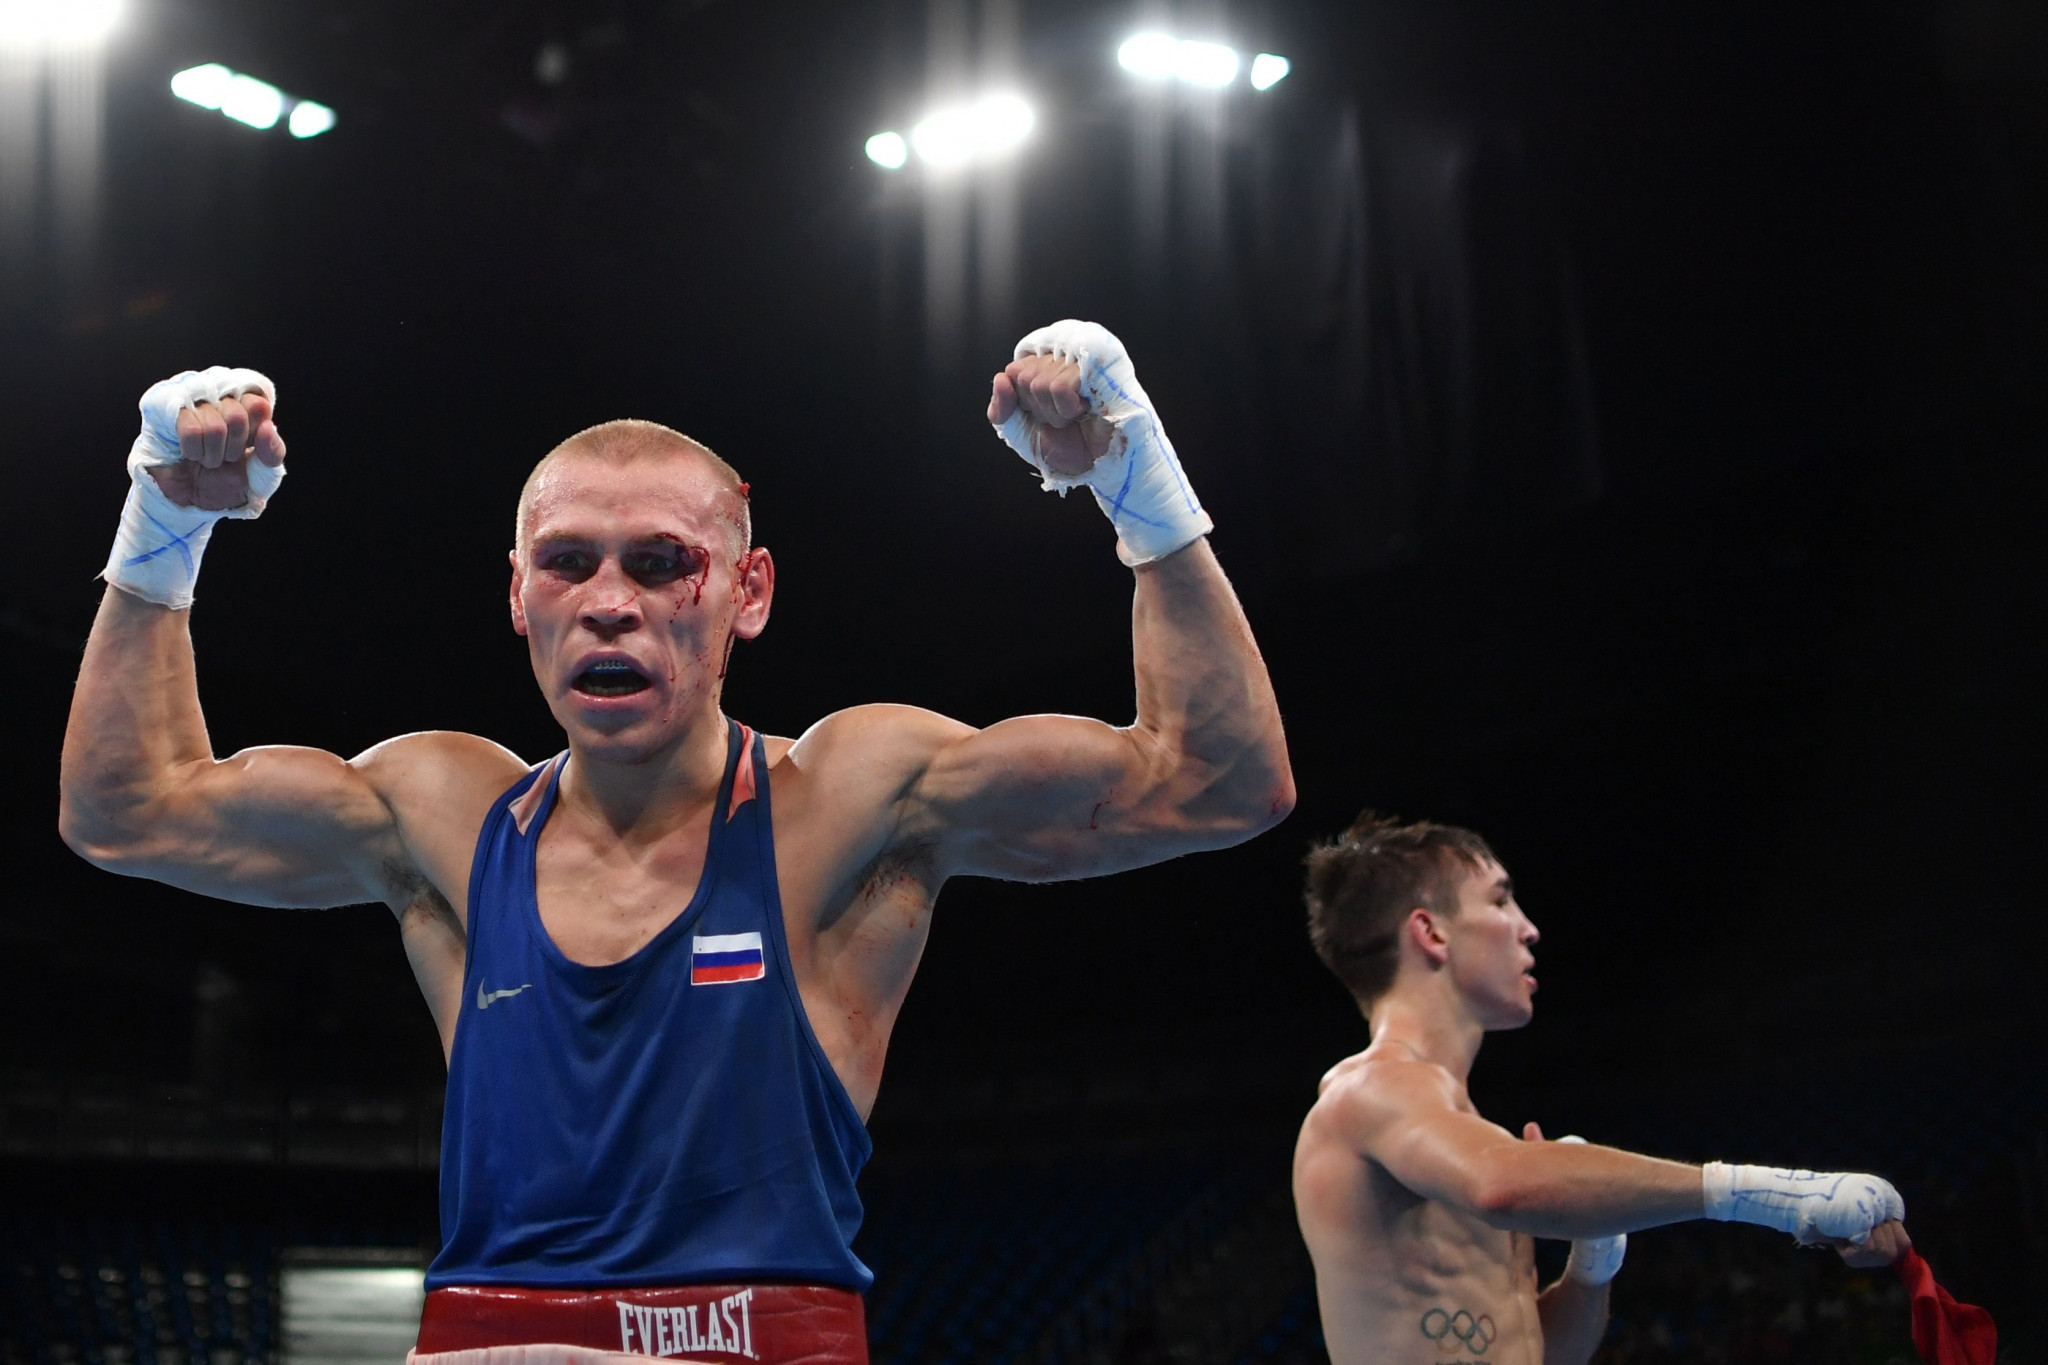 Vladimir Nikitin's controversial victory over Michael Conlan at Rio 2016 was followed by all of the judges at the Games being suspended ©Getty Images